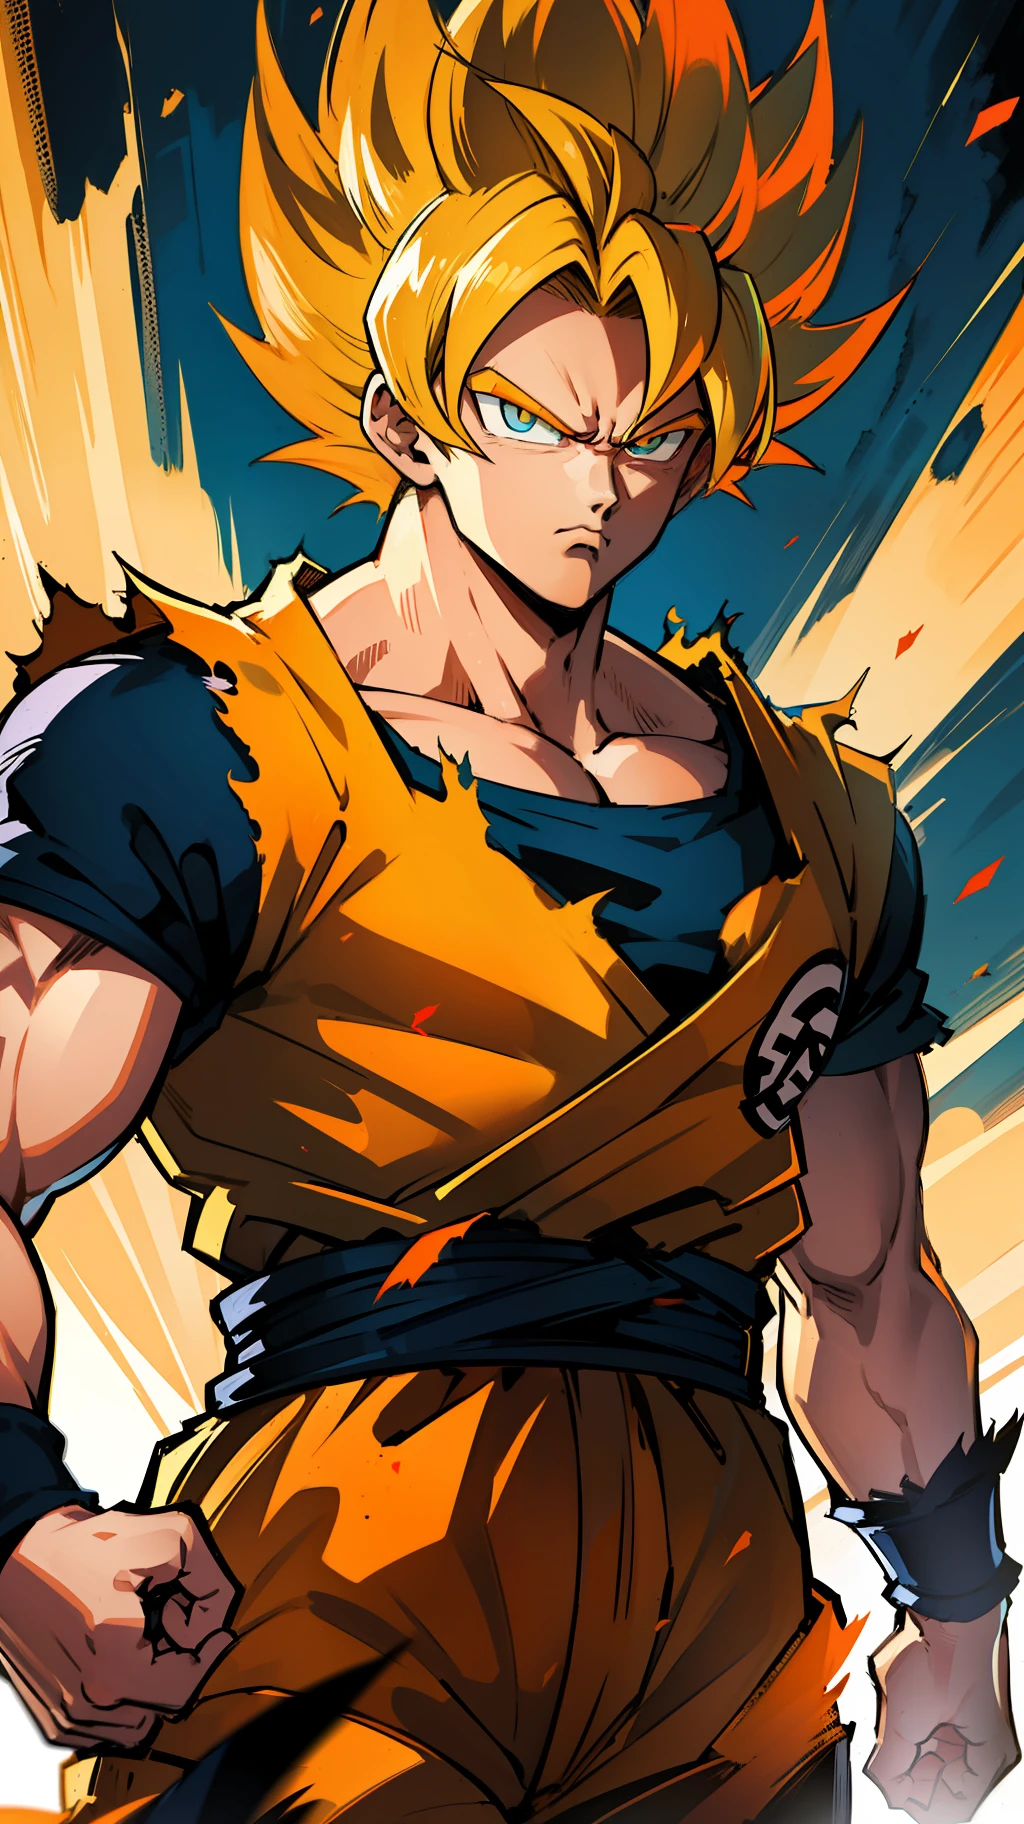 Son goku super sayajin looking at viewer, serious face. Yellow orange aura of power. Muscles. soft light. digital art. traces of 90's anime. Orange Torn clothes. Face defined,